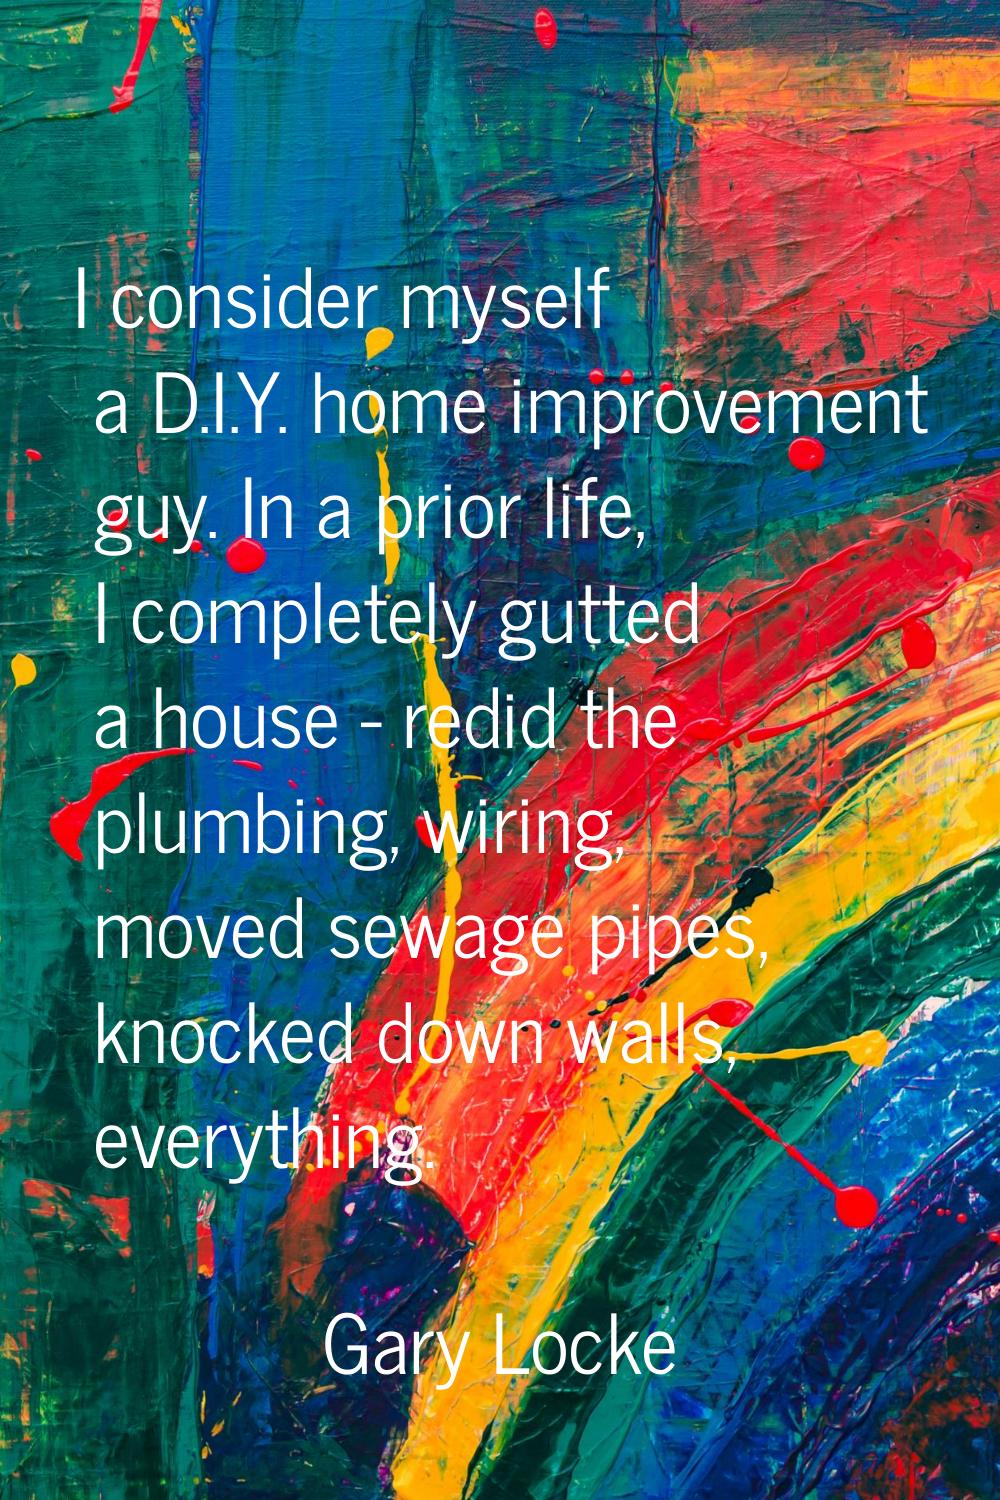 I consider myself a D.I.Y. home improvement guy. In a prior life, I completely gutted a house - red